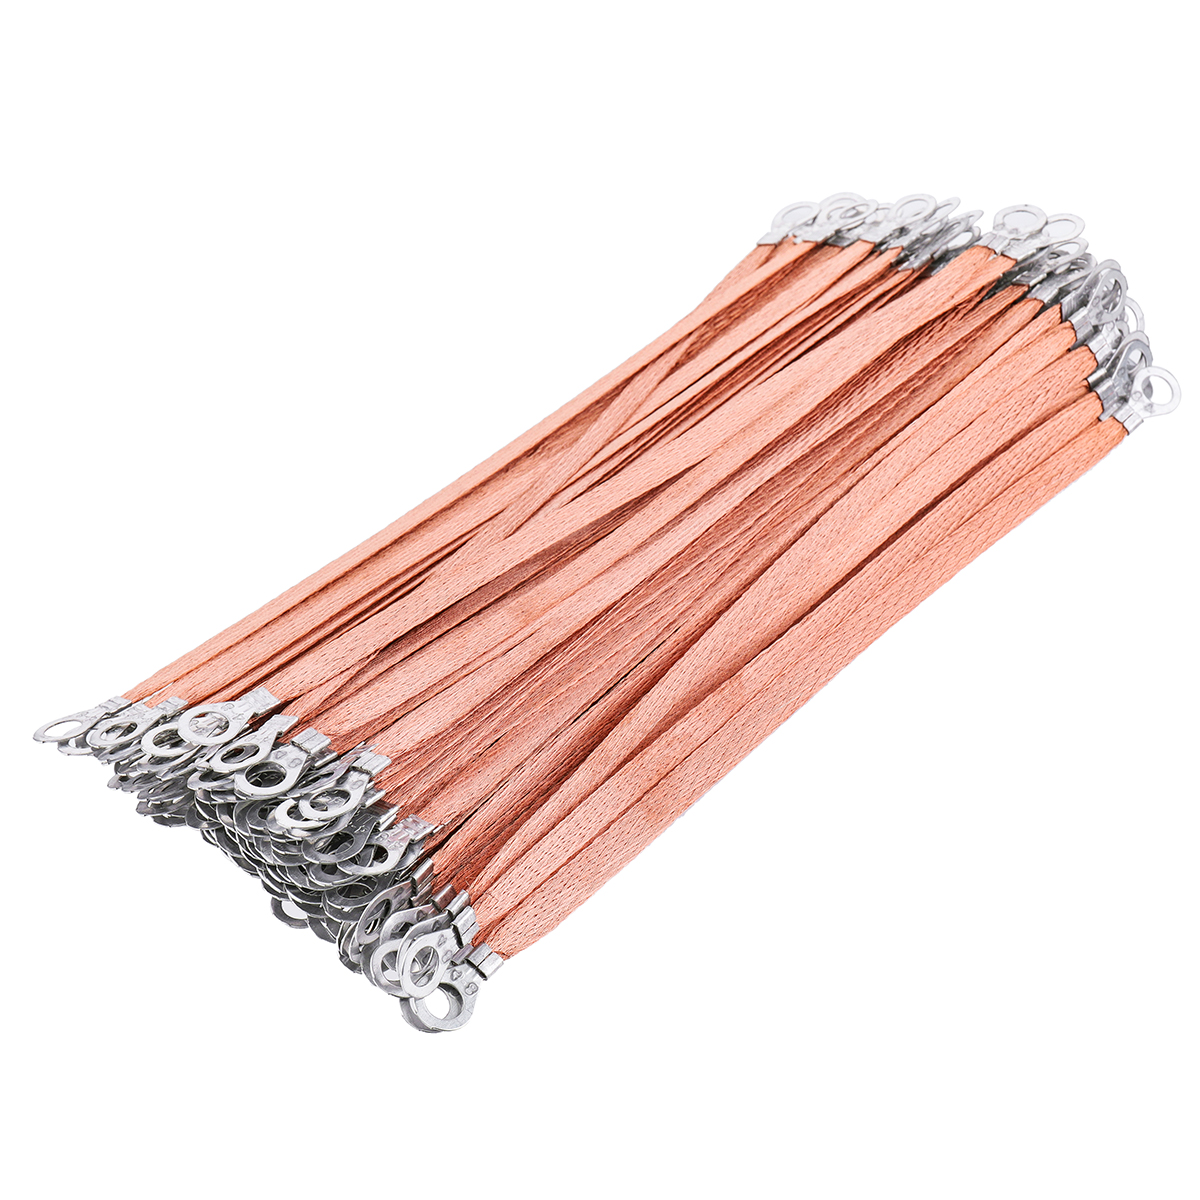 Durable-Pure-Copper-Braided-Wire-Span-Cable-Bridge-Connection-Wire-Ground-Lead-1382433